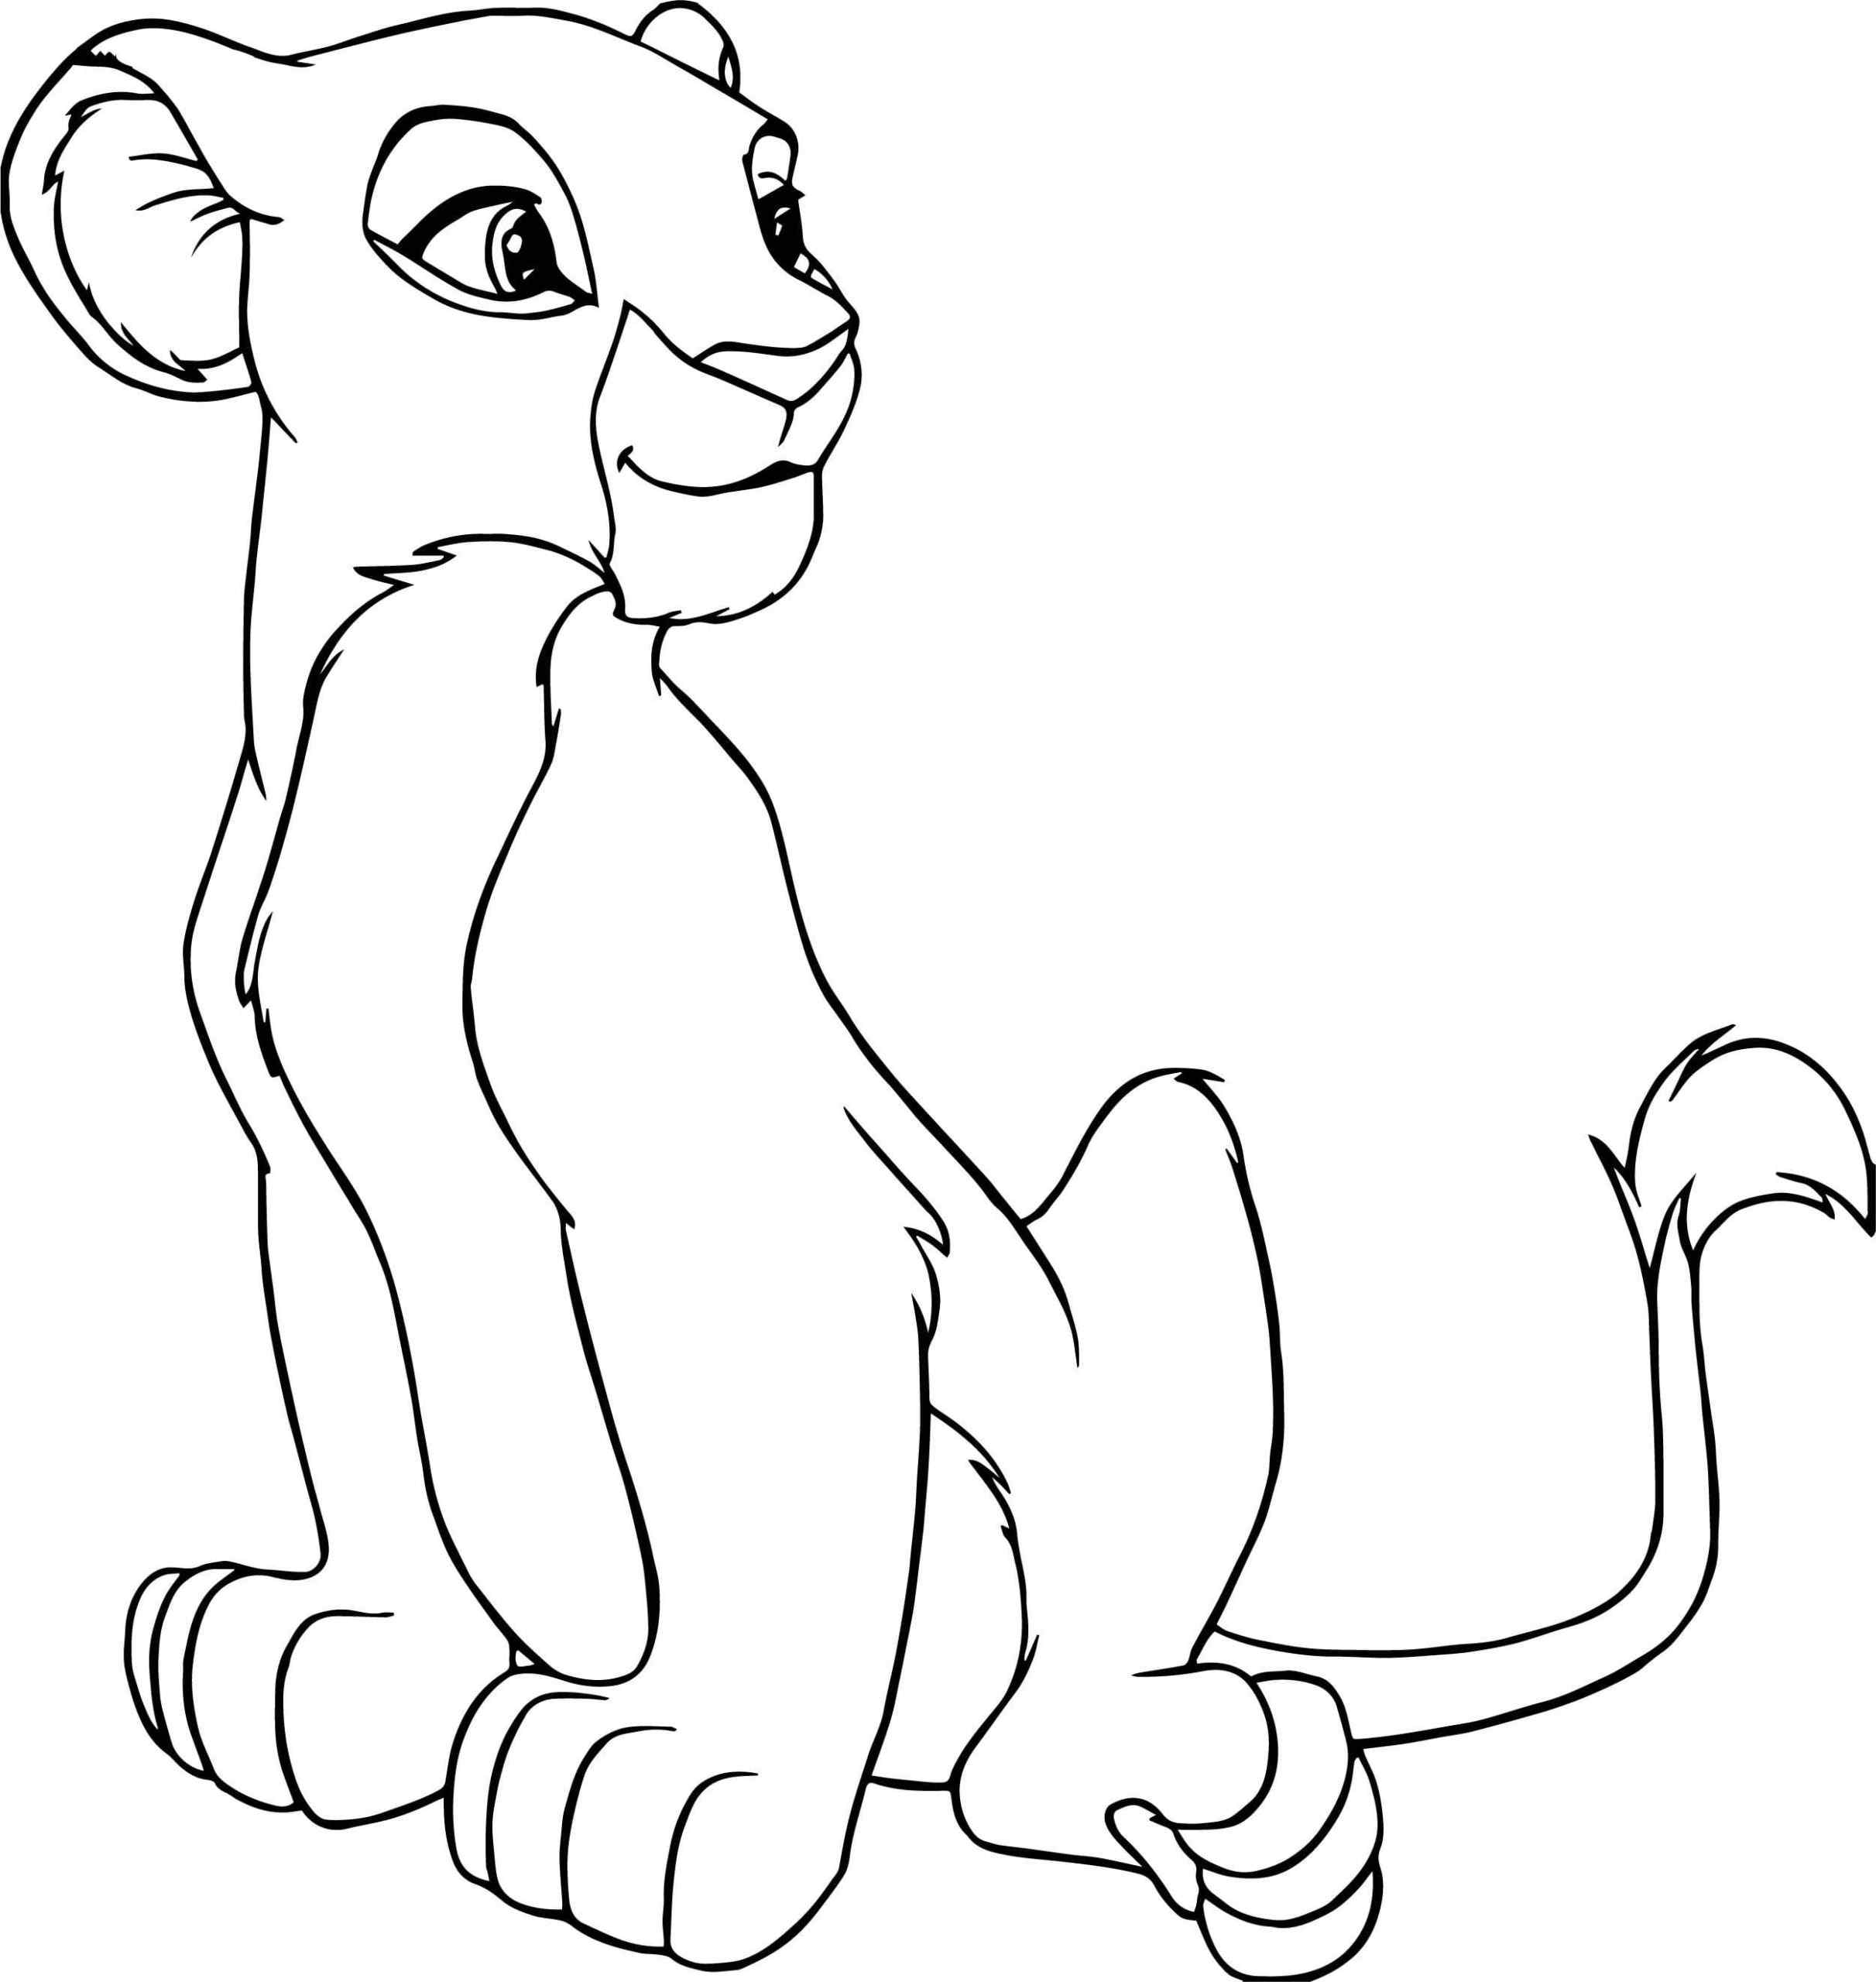 Well-groomed Neat Lioness Kiara Coloring Page